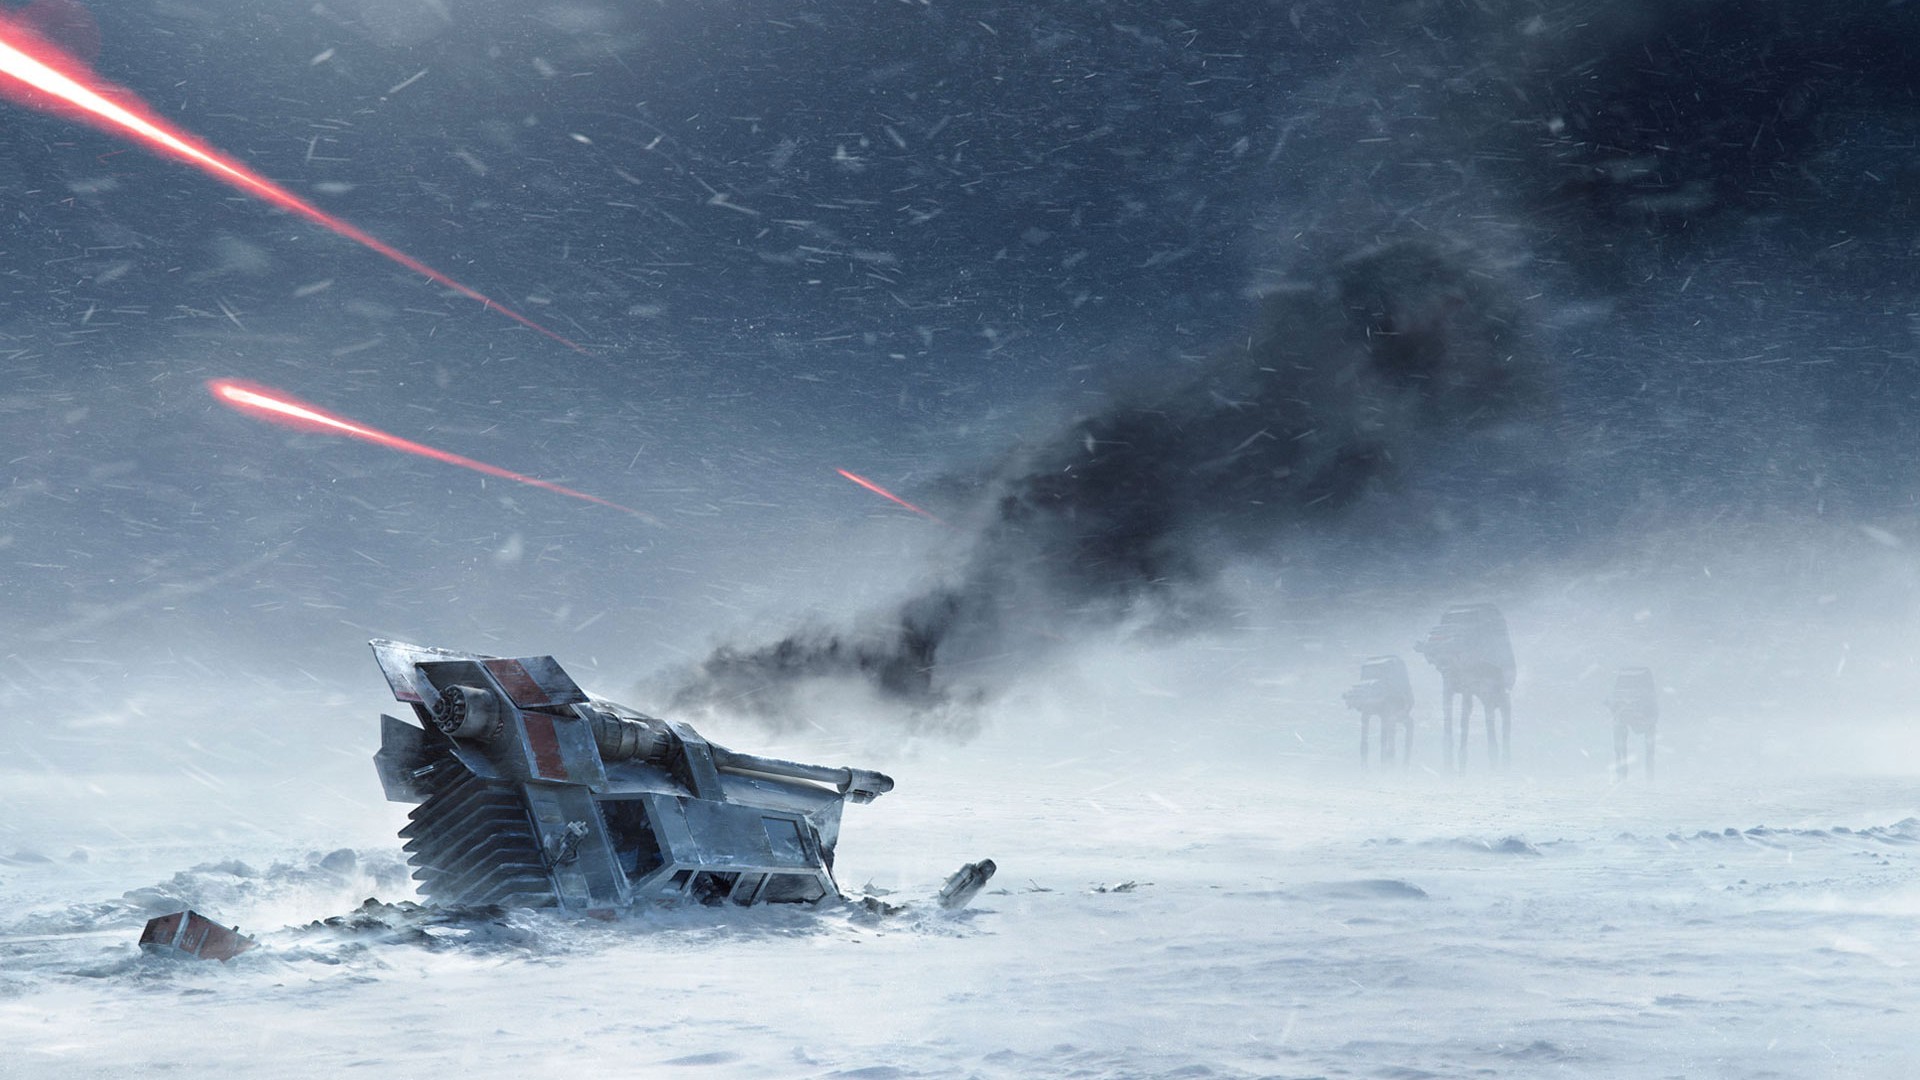 General 1920x1080 Star Wars Hoth AT-AT war digital art video games Star Wars: Battlefront T-47 airspeeder  video game art science fiction PC gaming battle Electronic Arts EA DICE Battle of Hoth